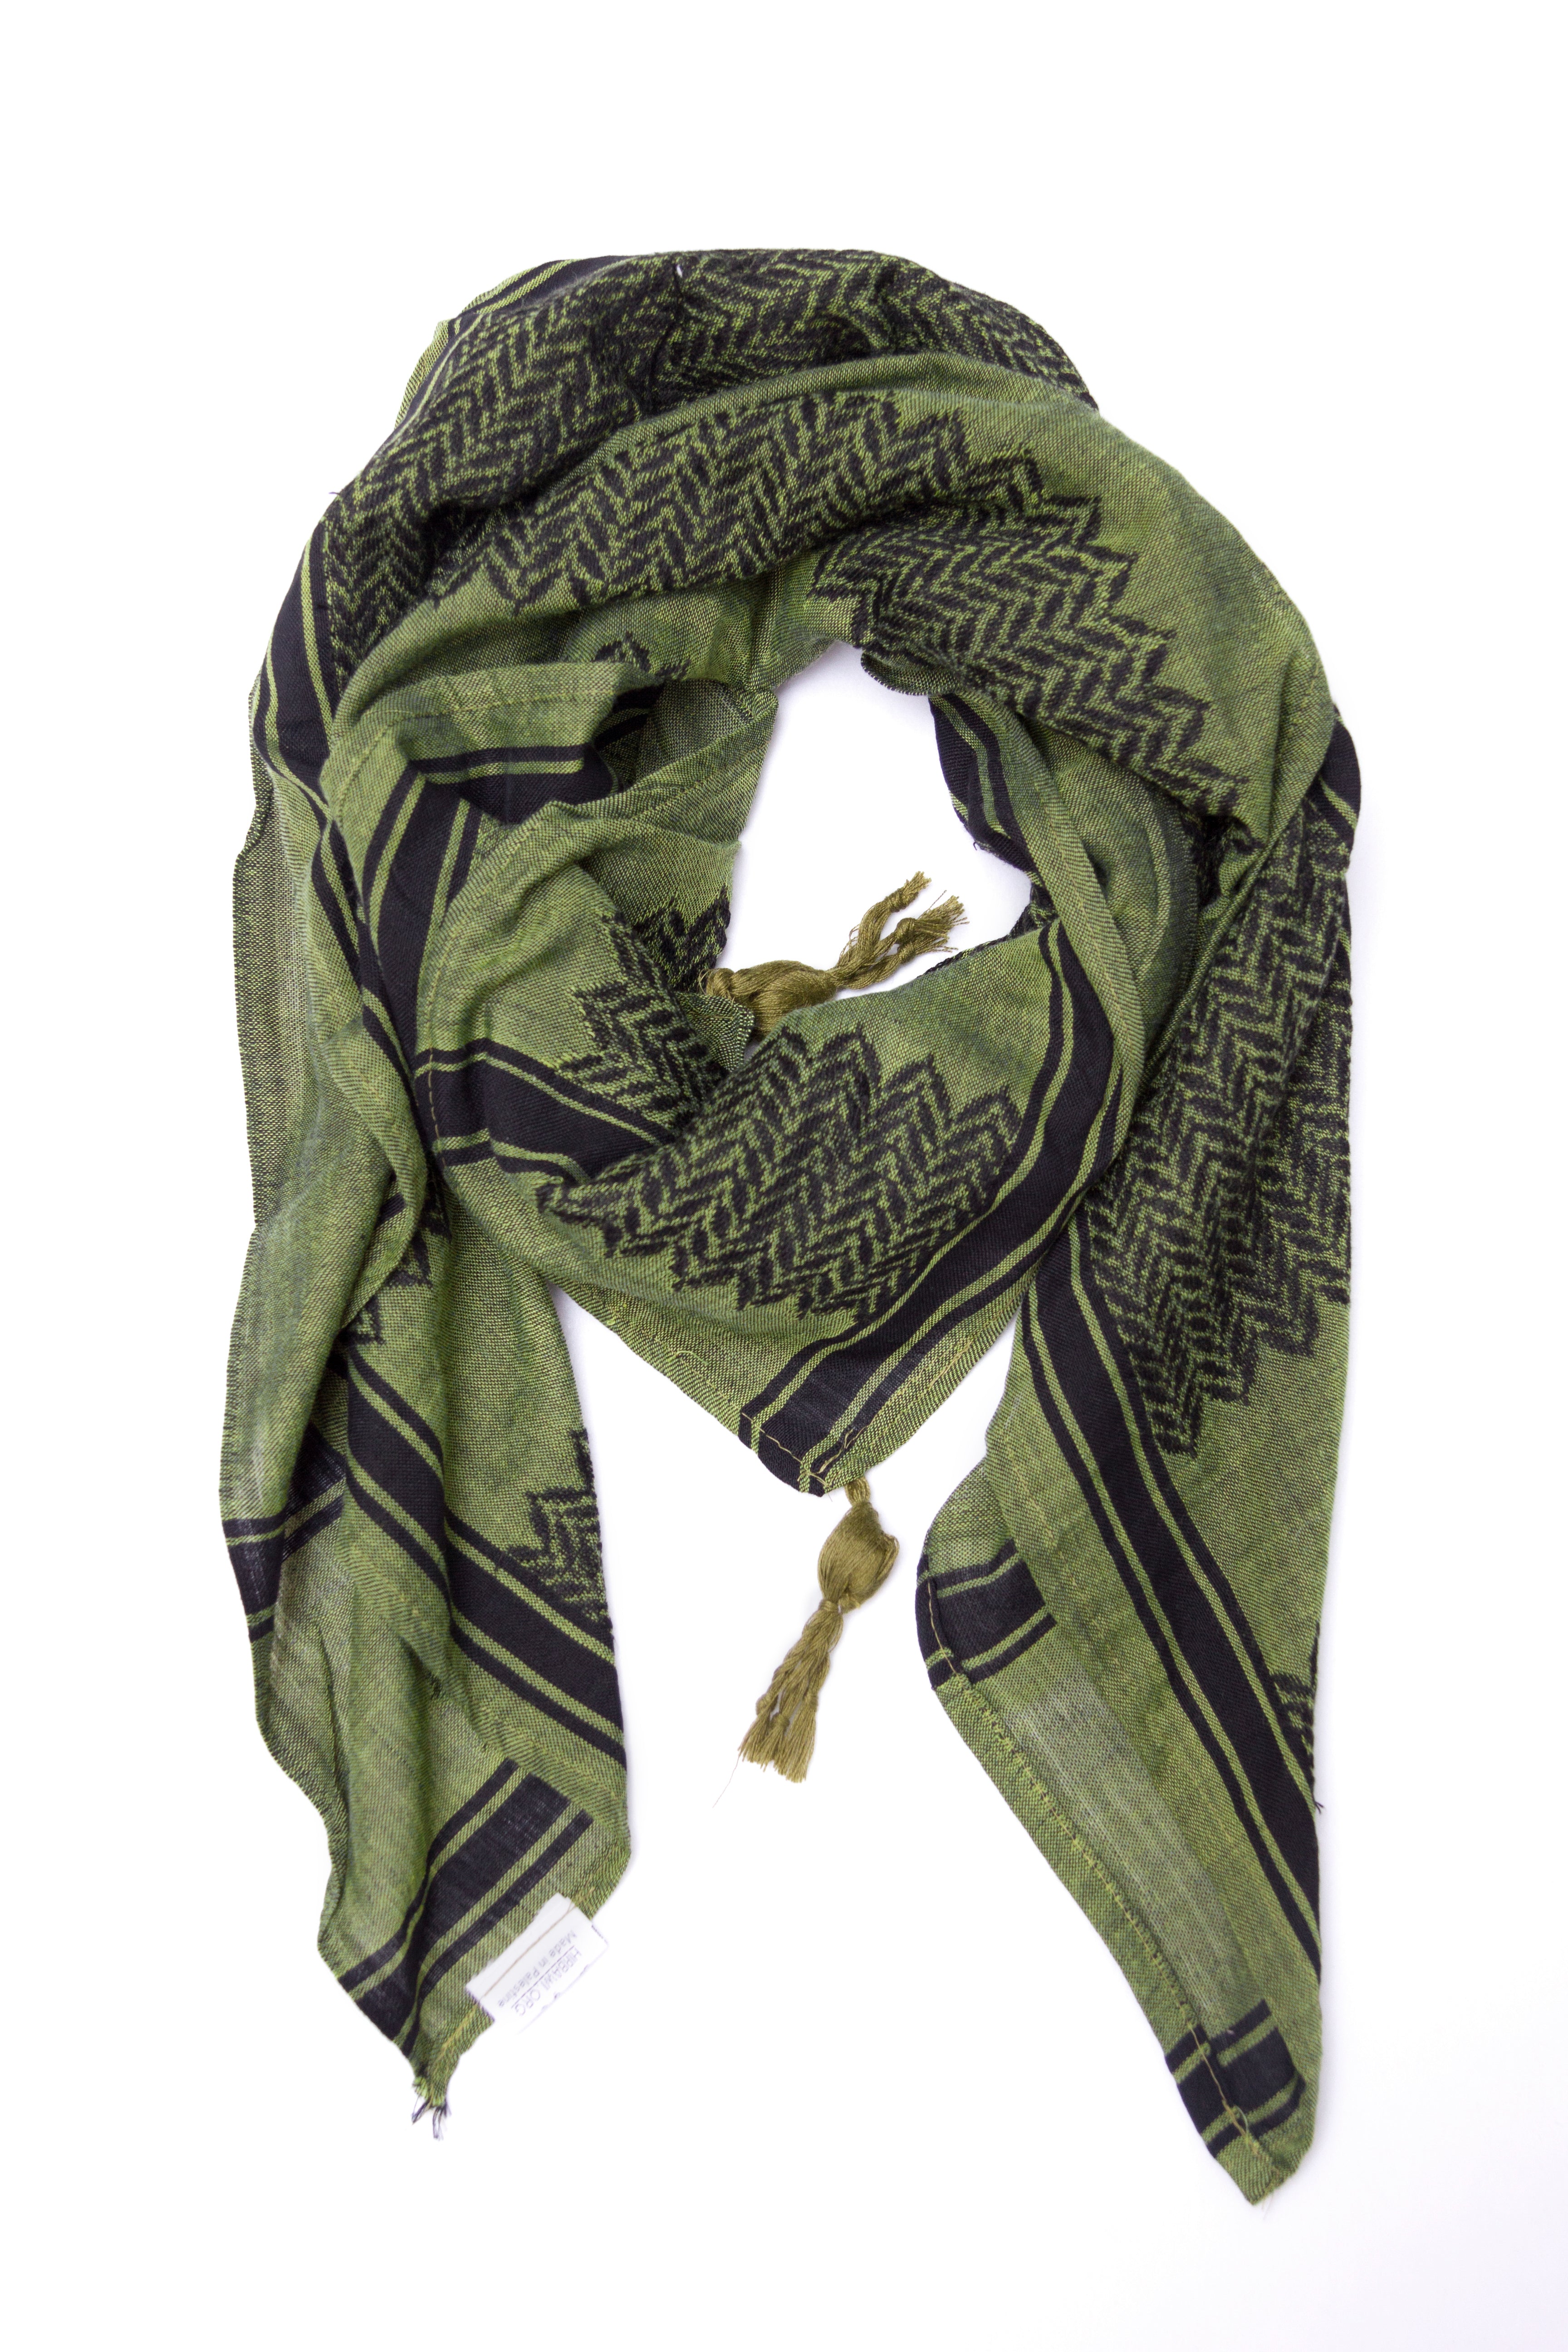 Charity Accessories - Palestinian Keffiyeh - Olive & Yellow